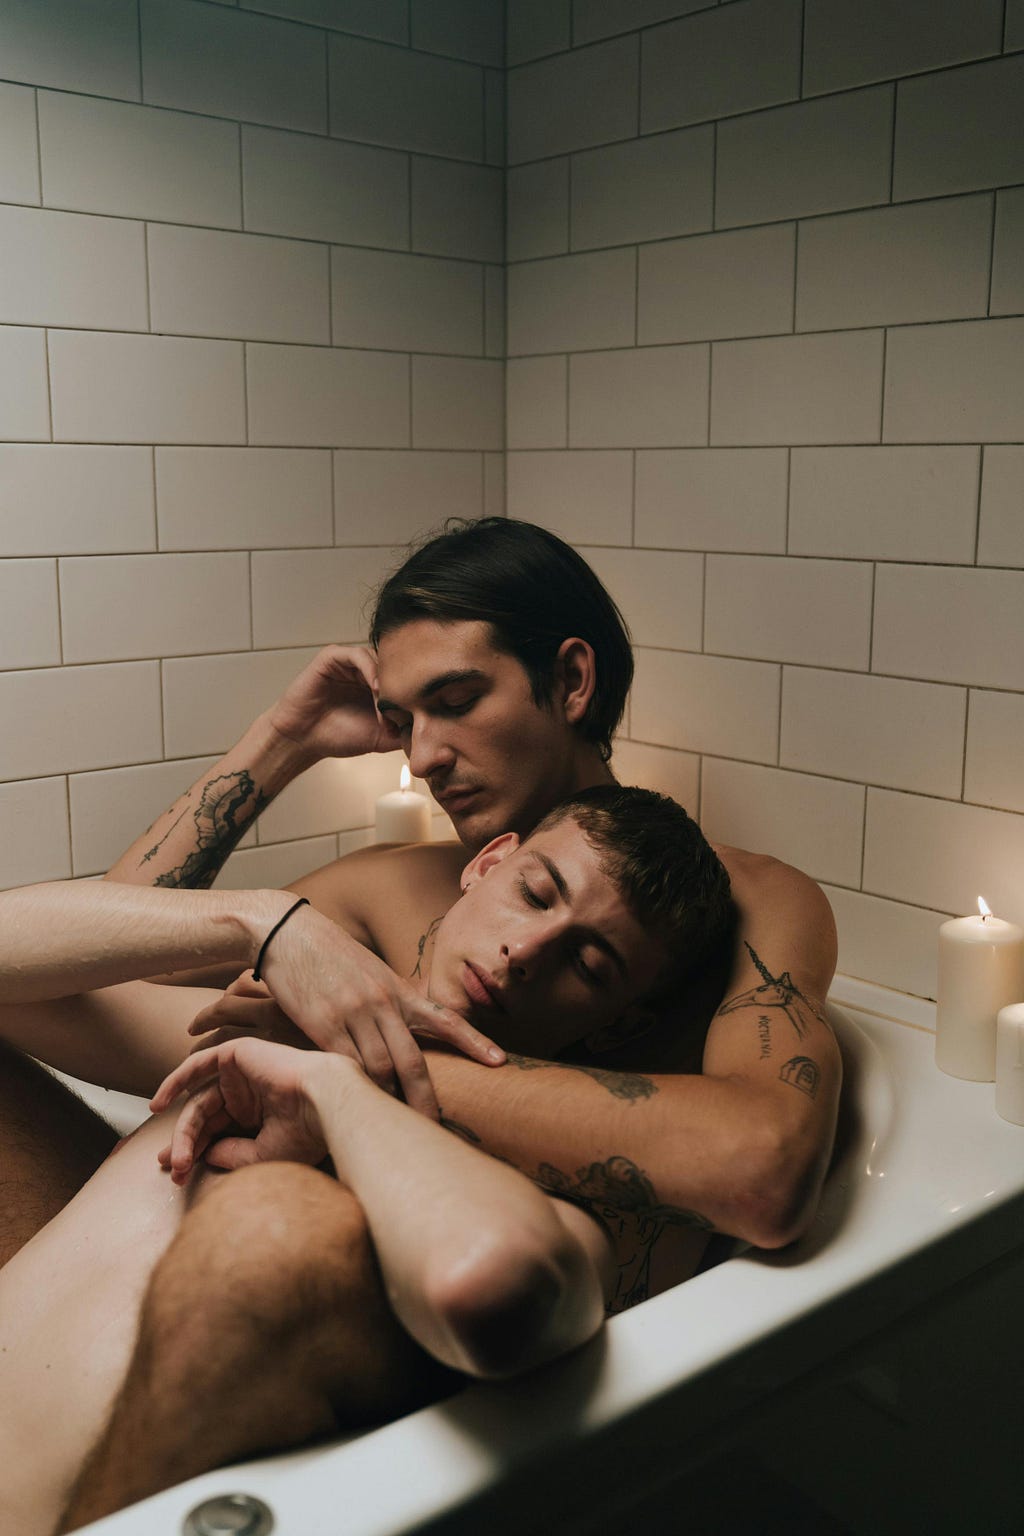 Two naked men in a bath